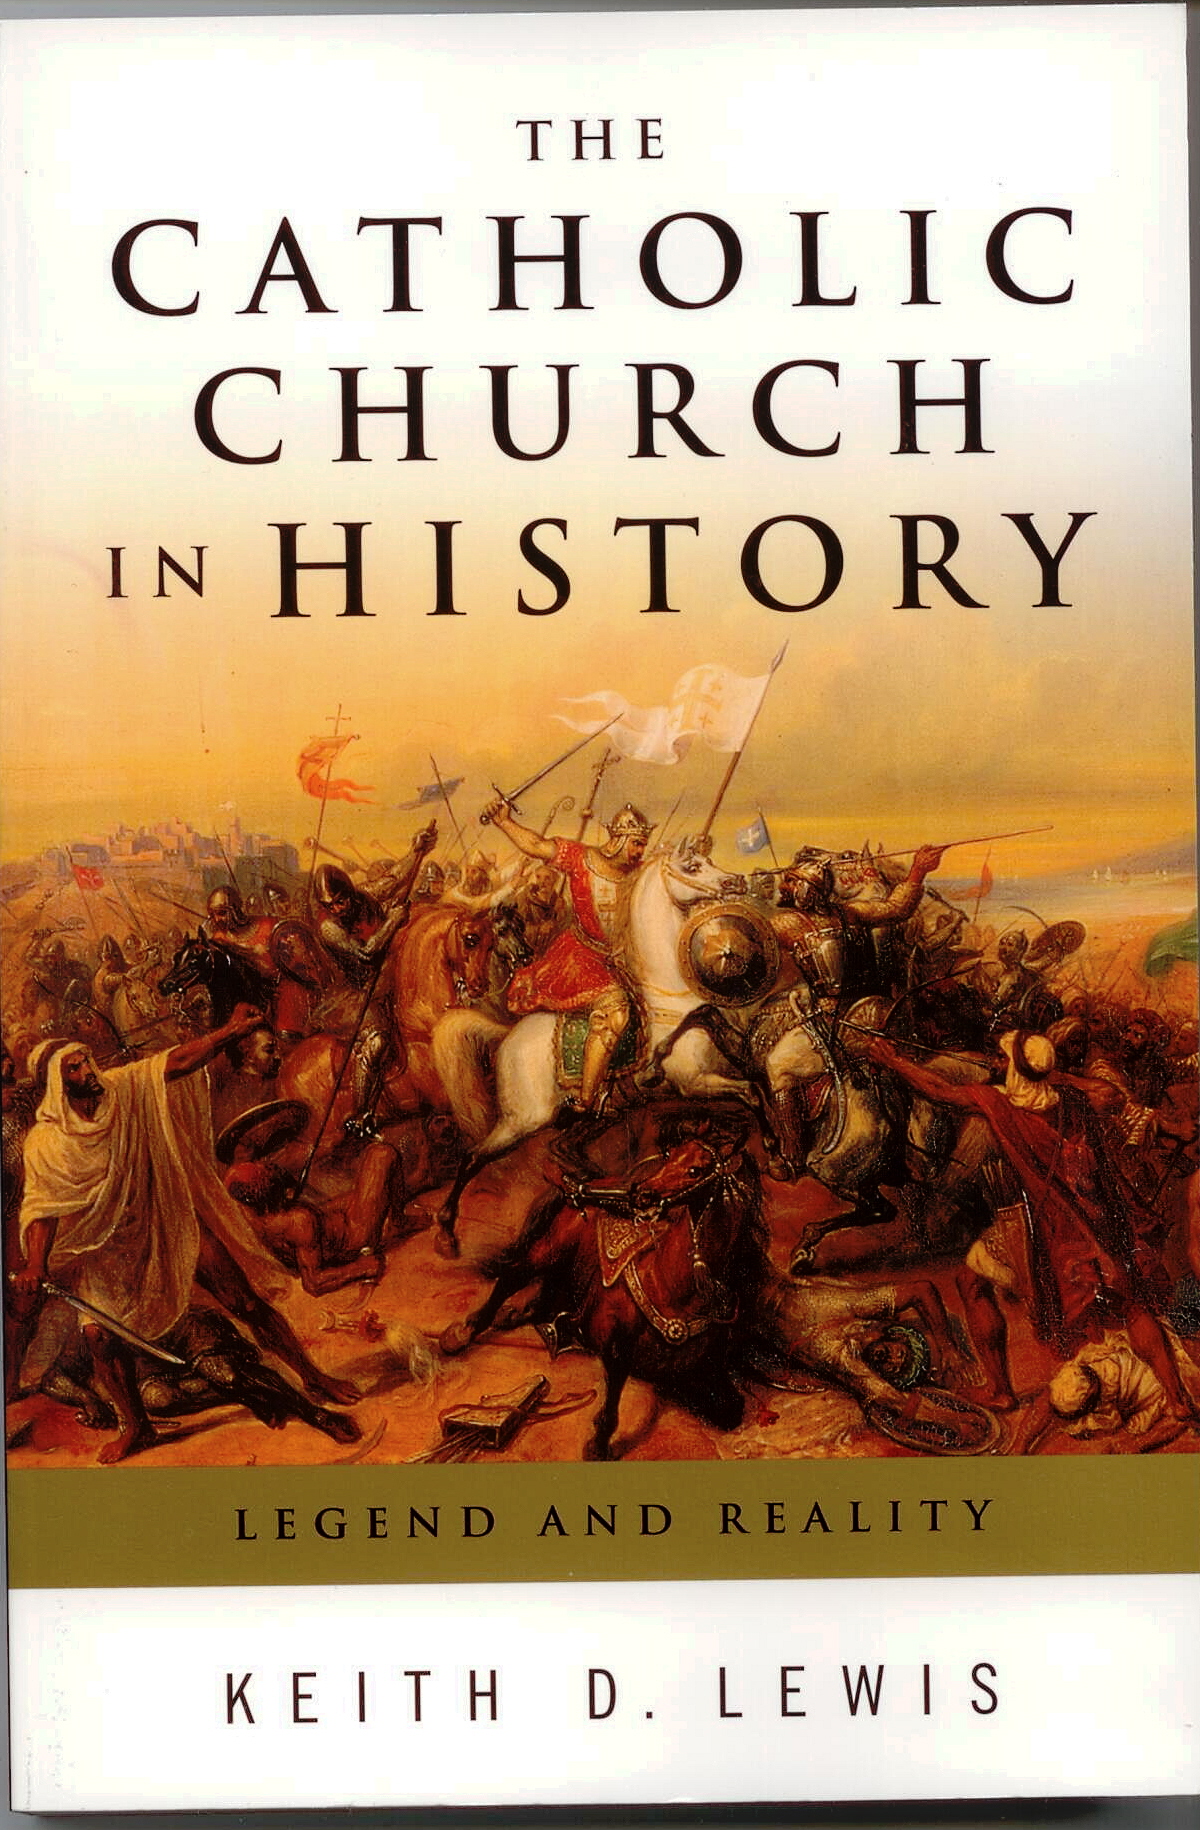 The Catholic Church In History By Keith D. Lewis